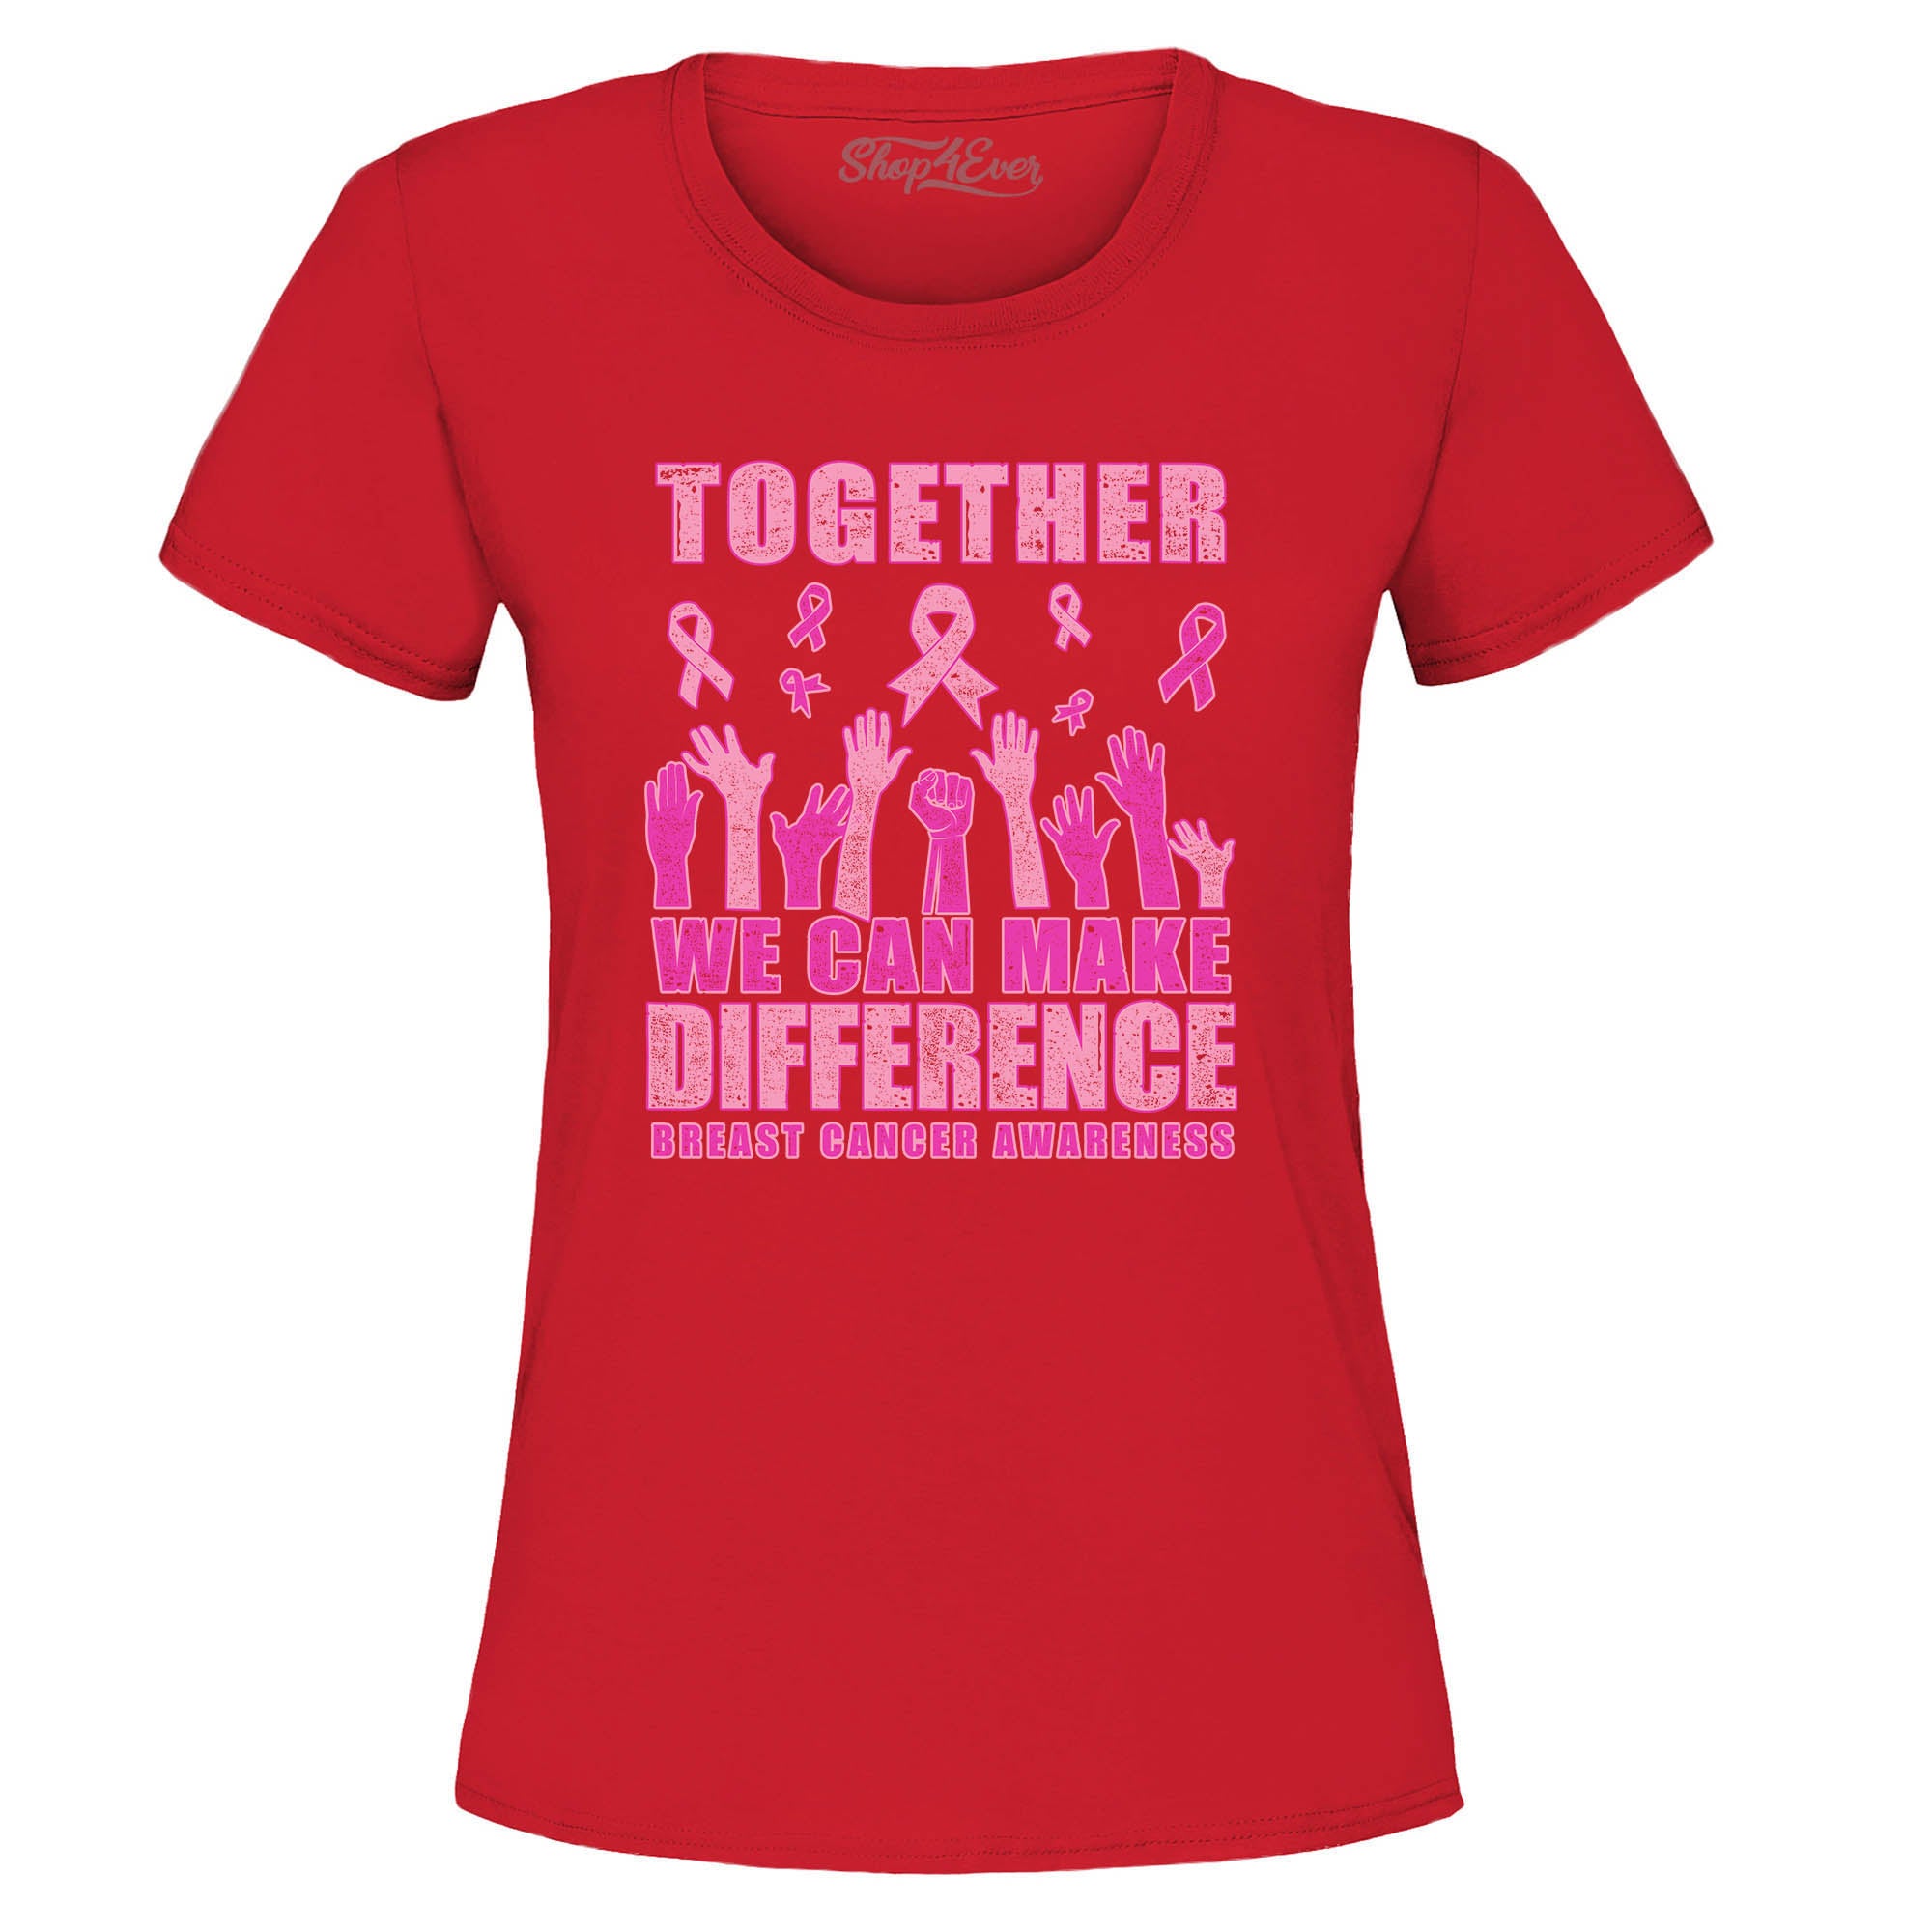 Together We Can Make A Difference Breast Cancer Awareness Women's T-Shirt Inspirational Tee